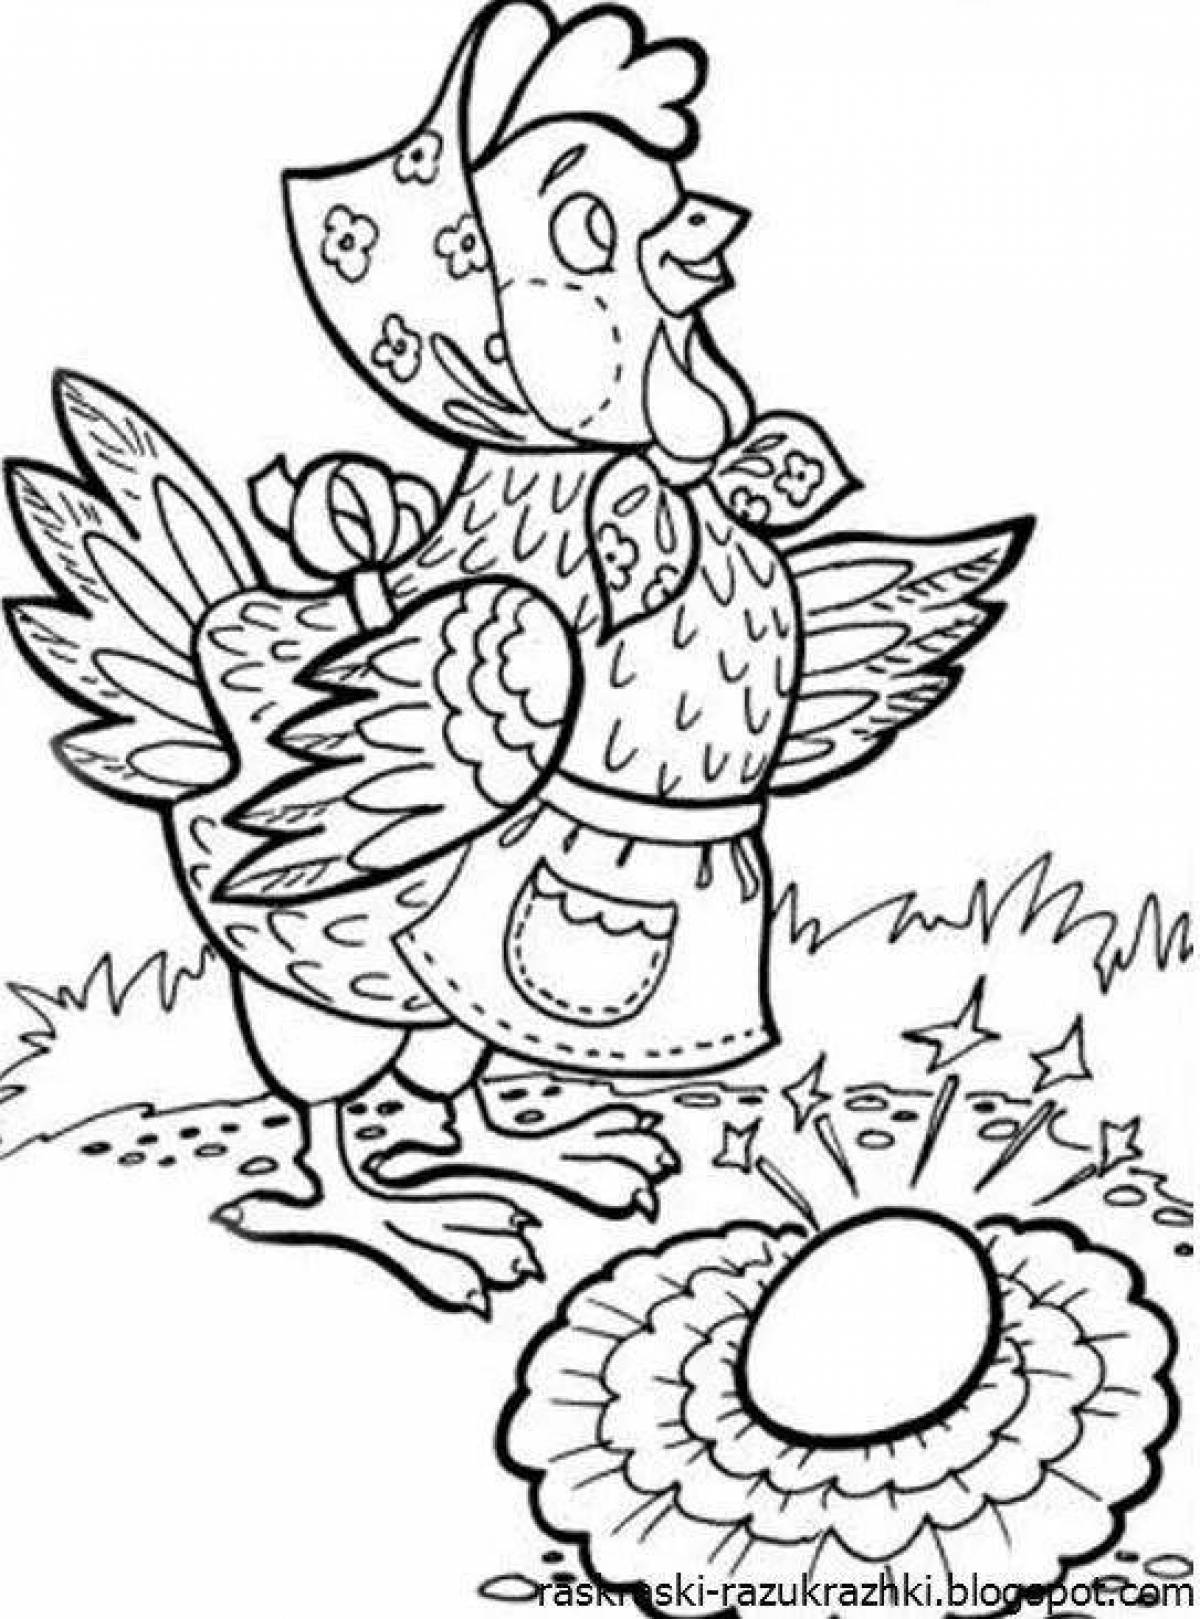 Rampant coloring book heroes of fairy tales for children